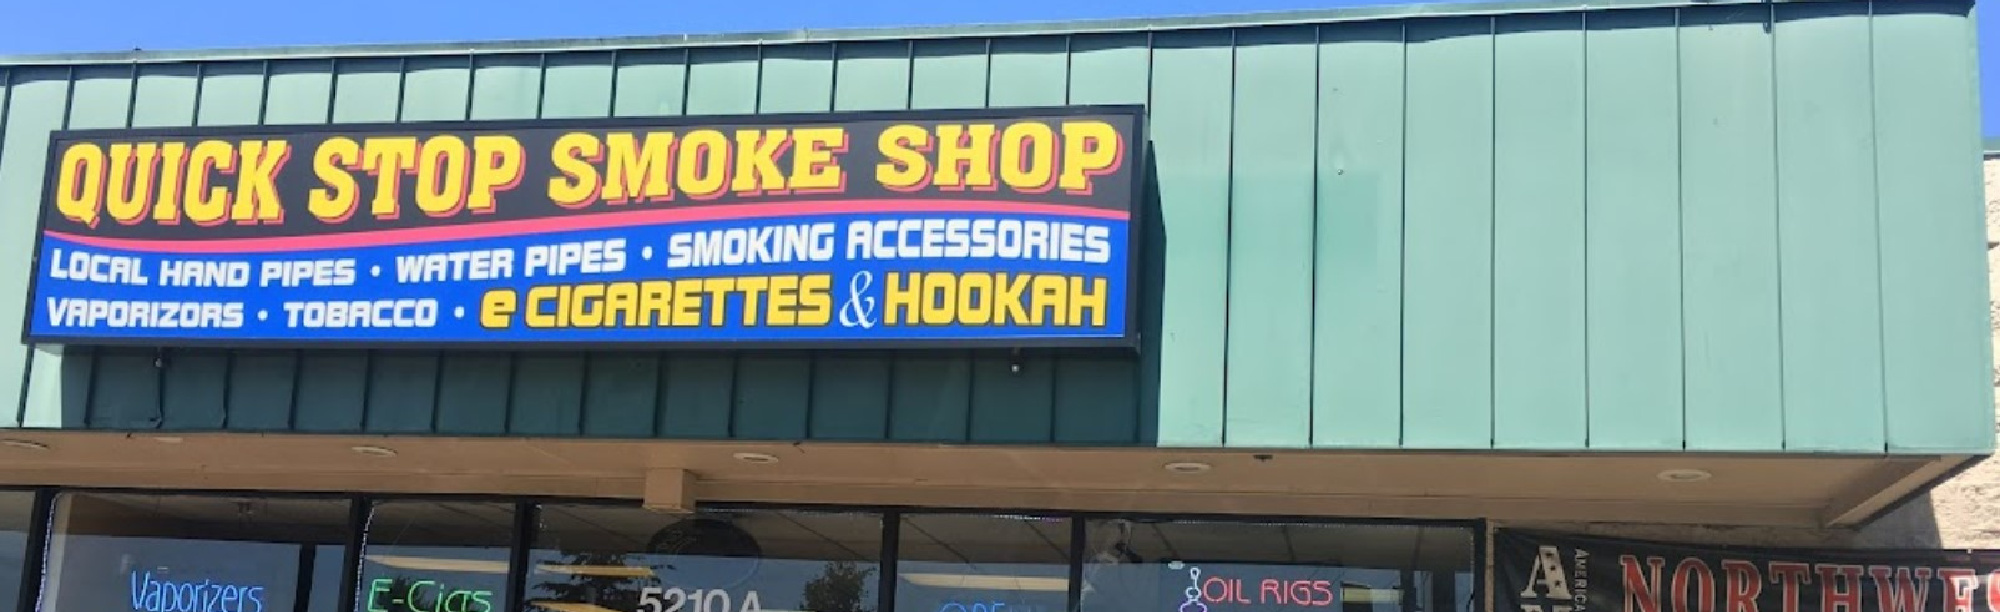 image of quick stop smoke shop in vancouver wa